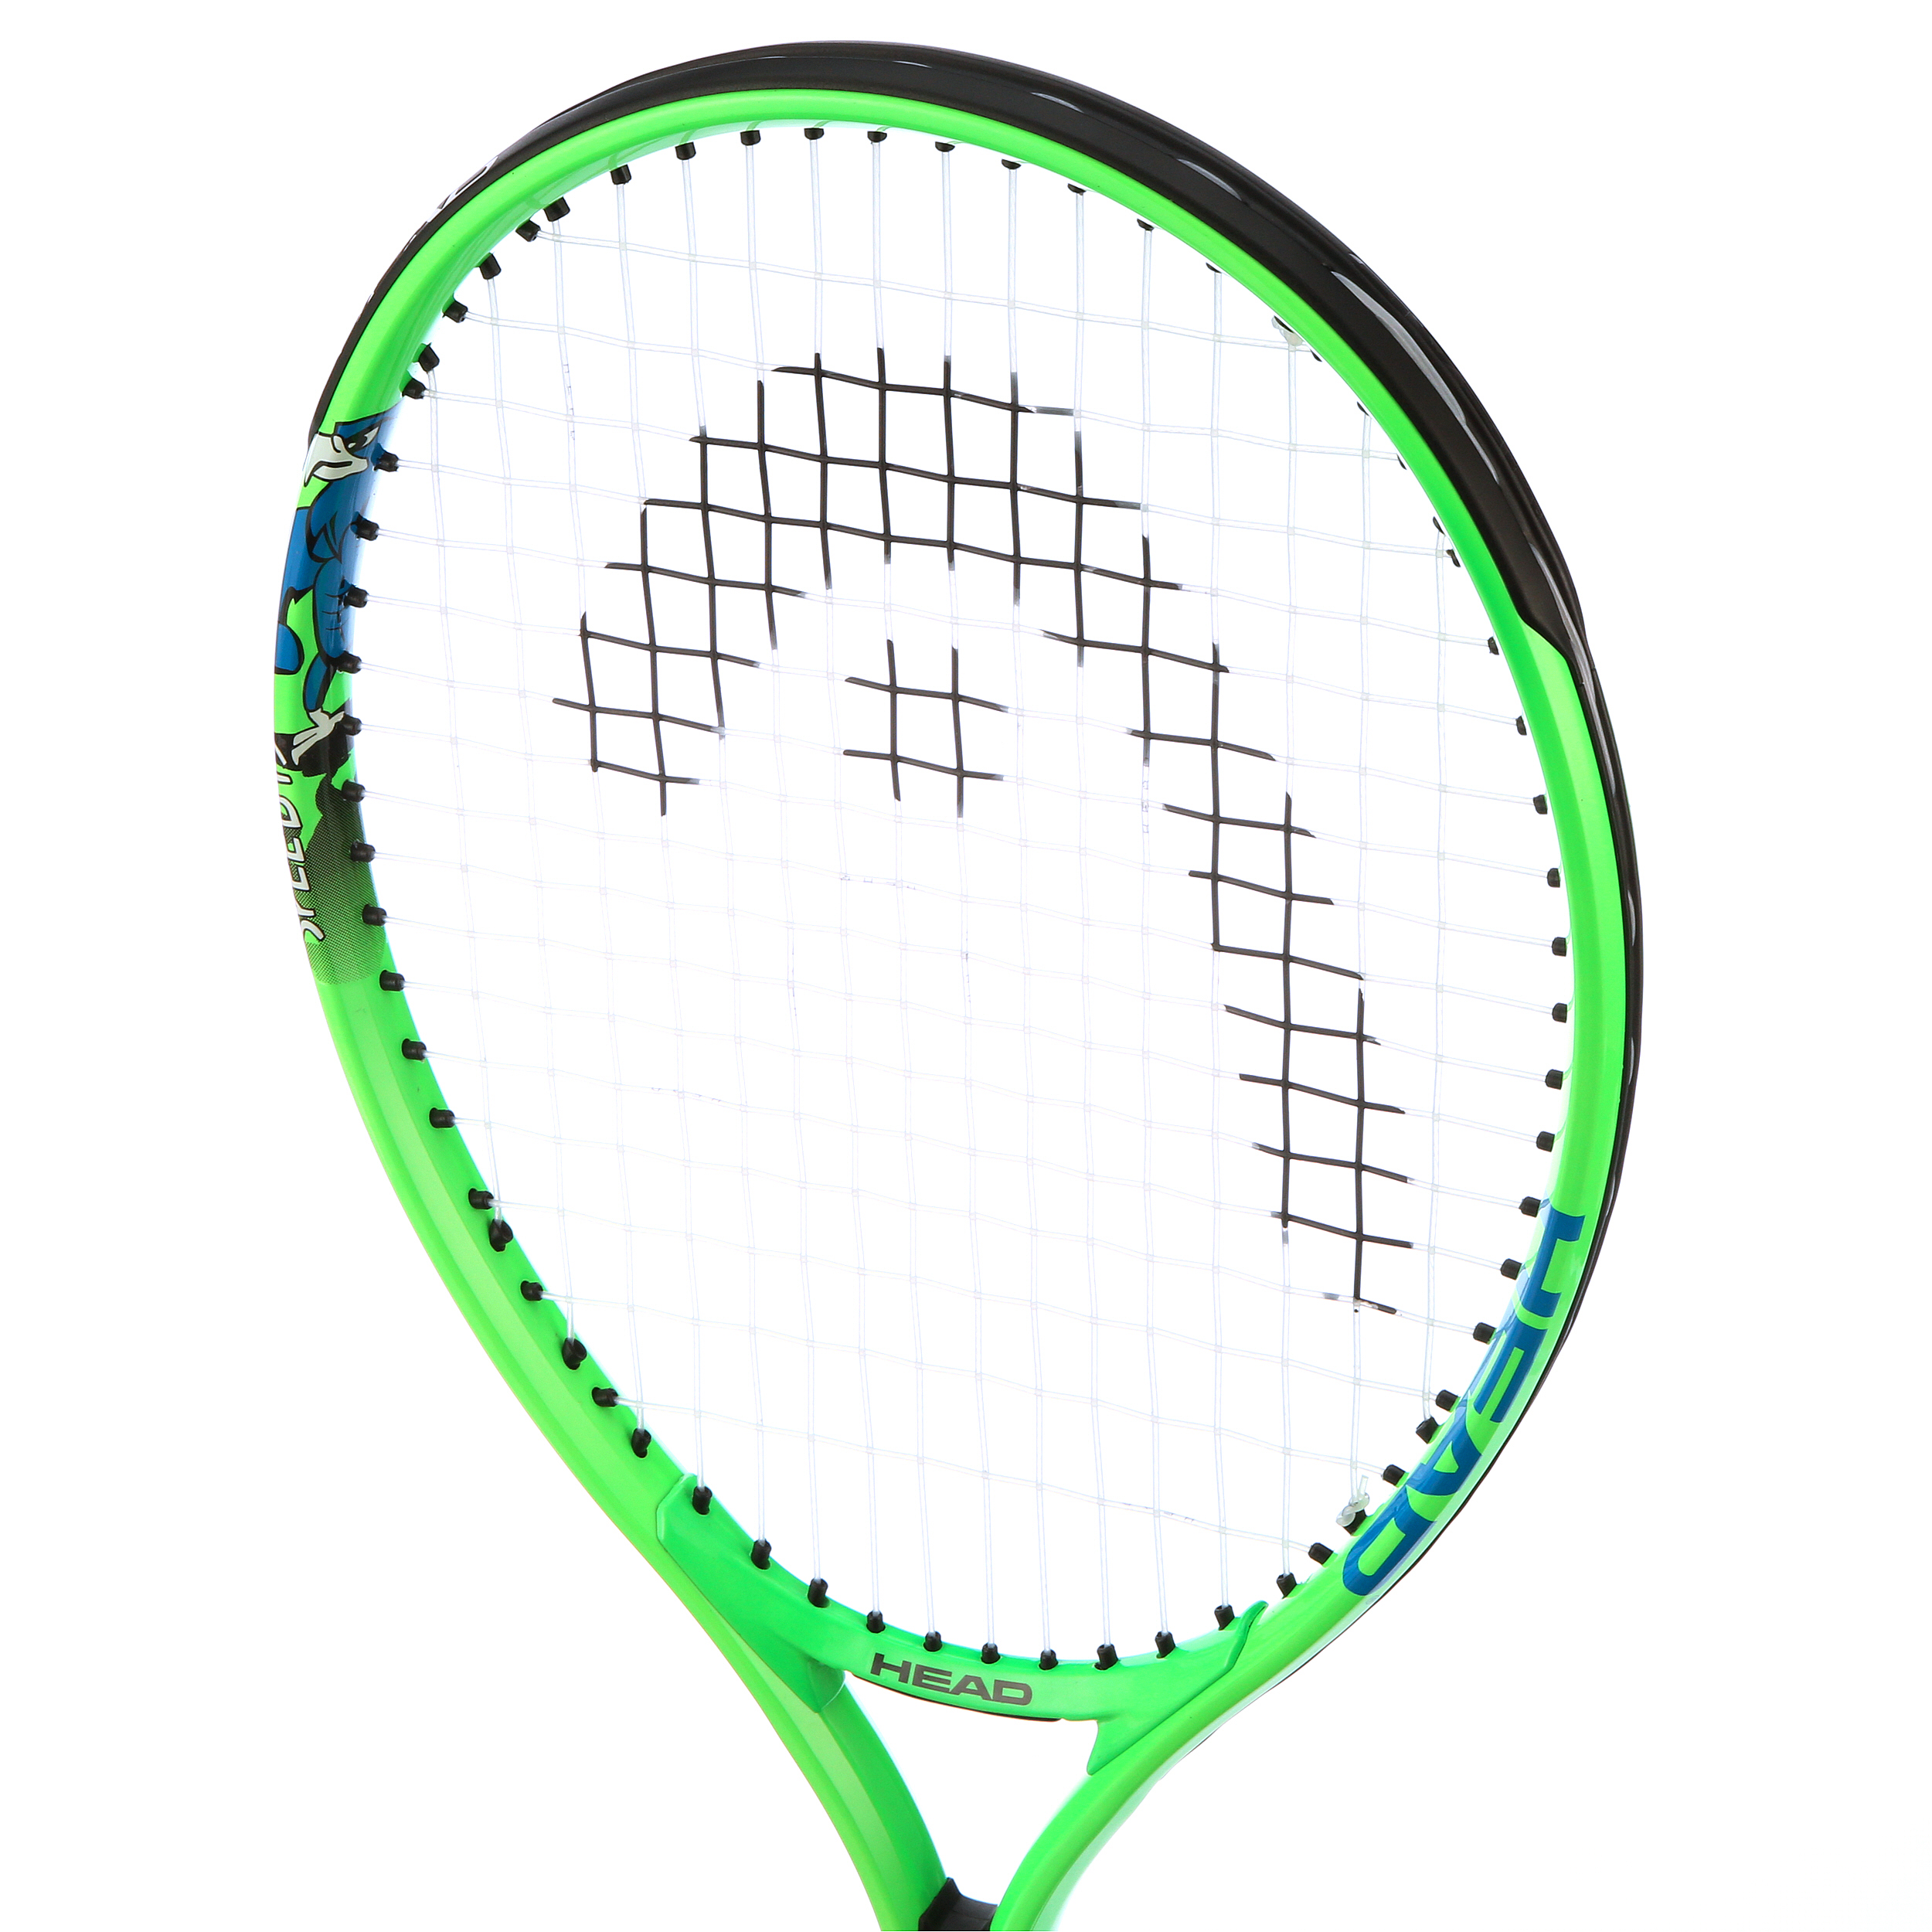 HEAD Speed 19 Junior Tennis Racquet, 81 Sq. in. Head Size, Green, 6.2 Ounces - image 2 of 2